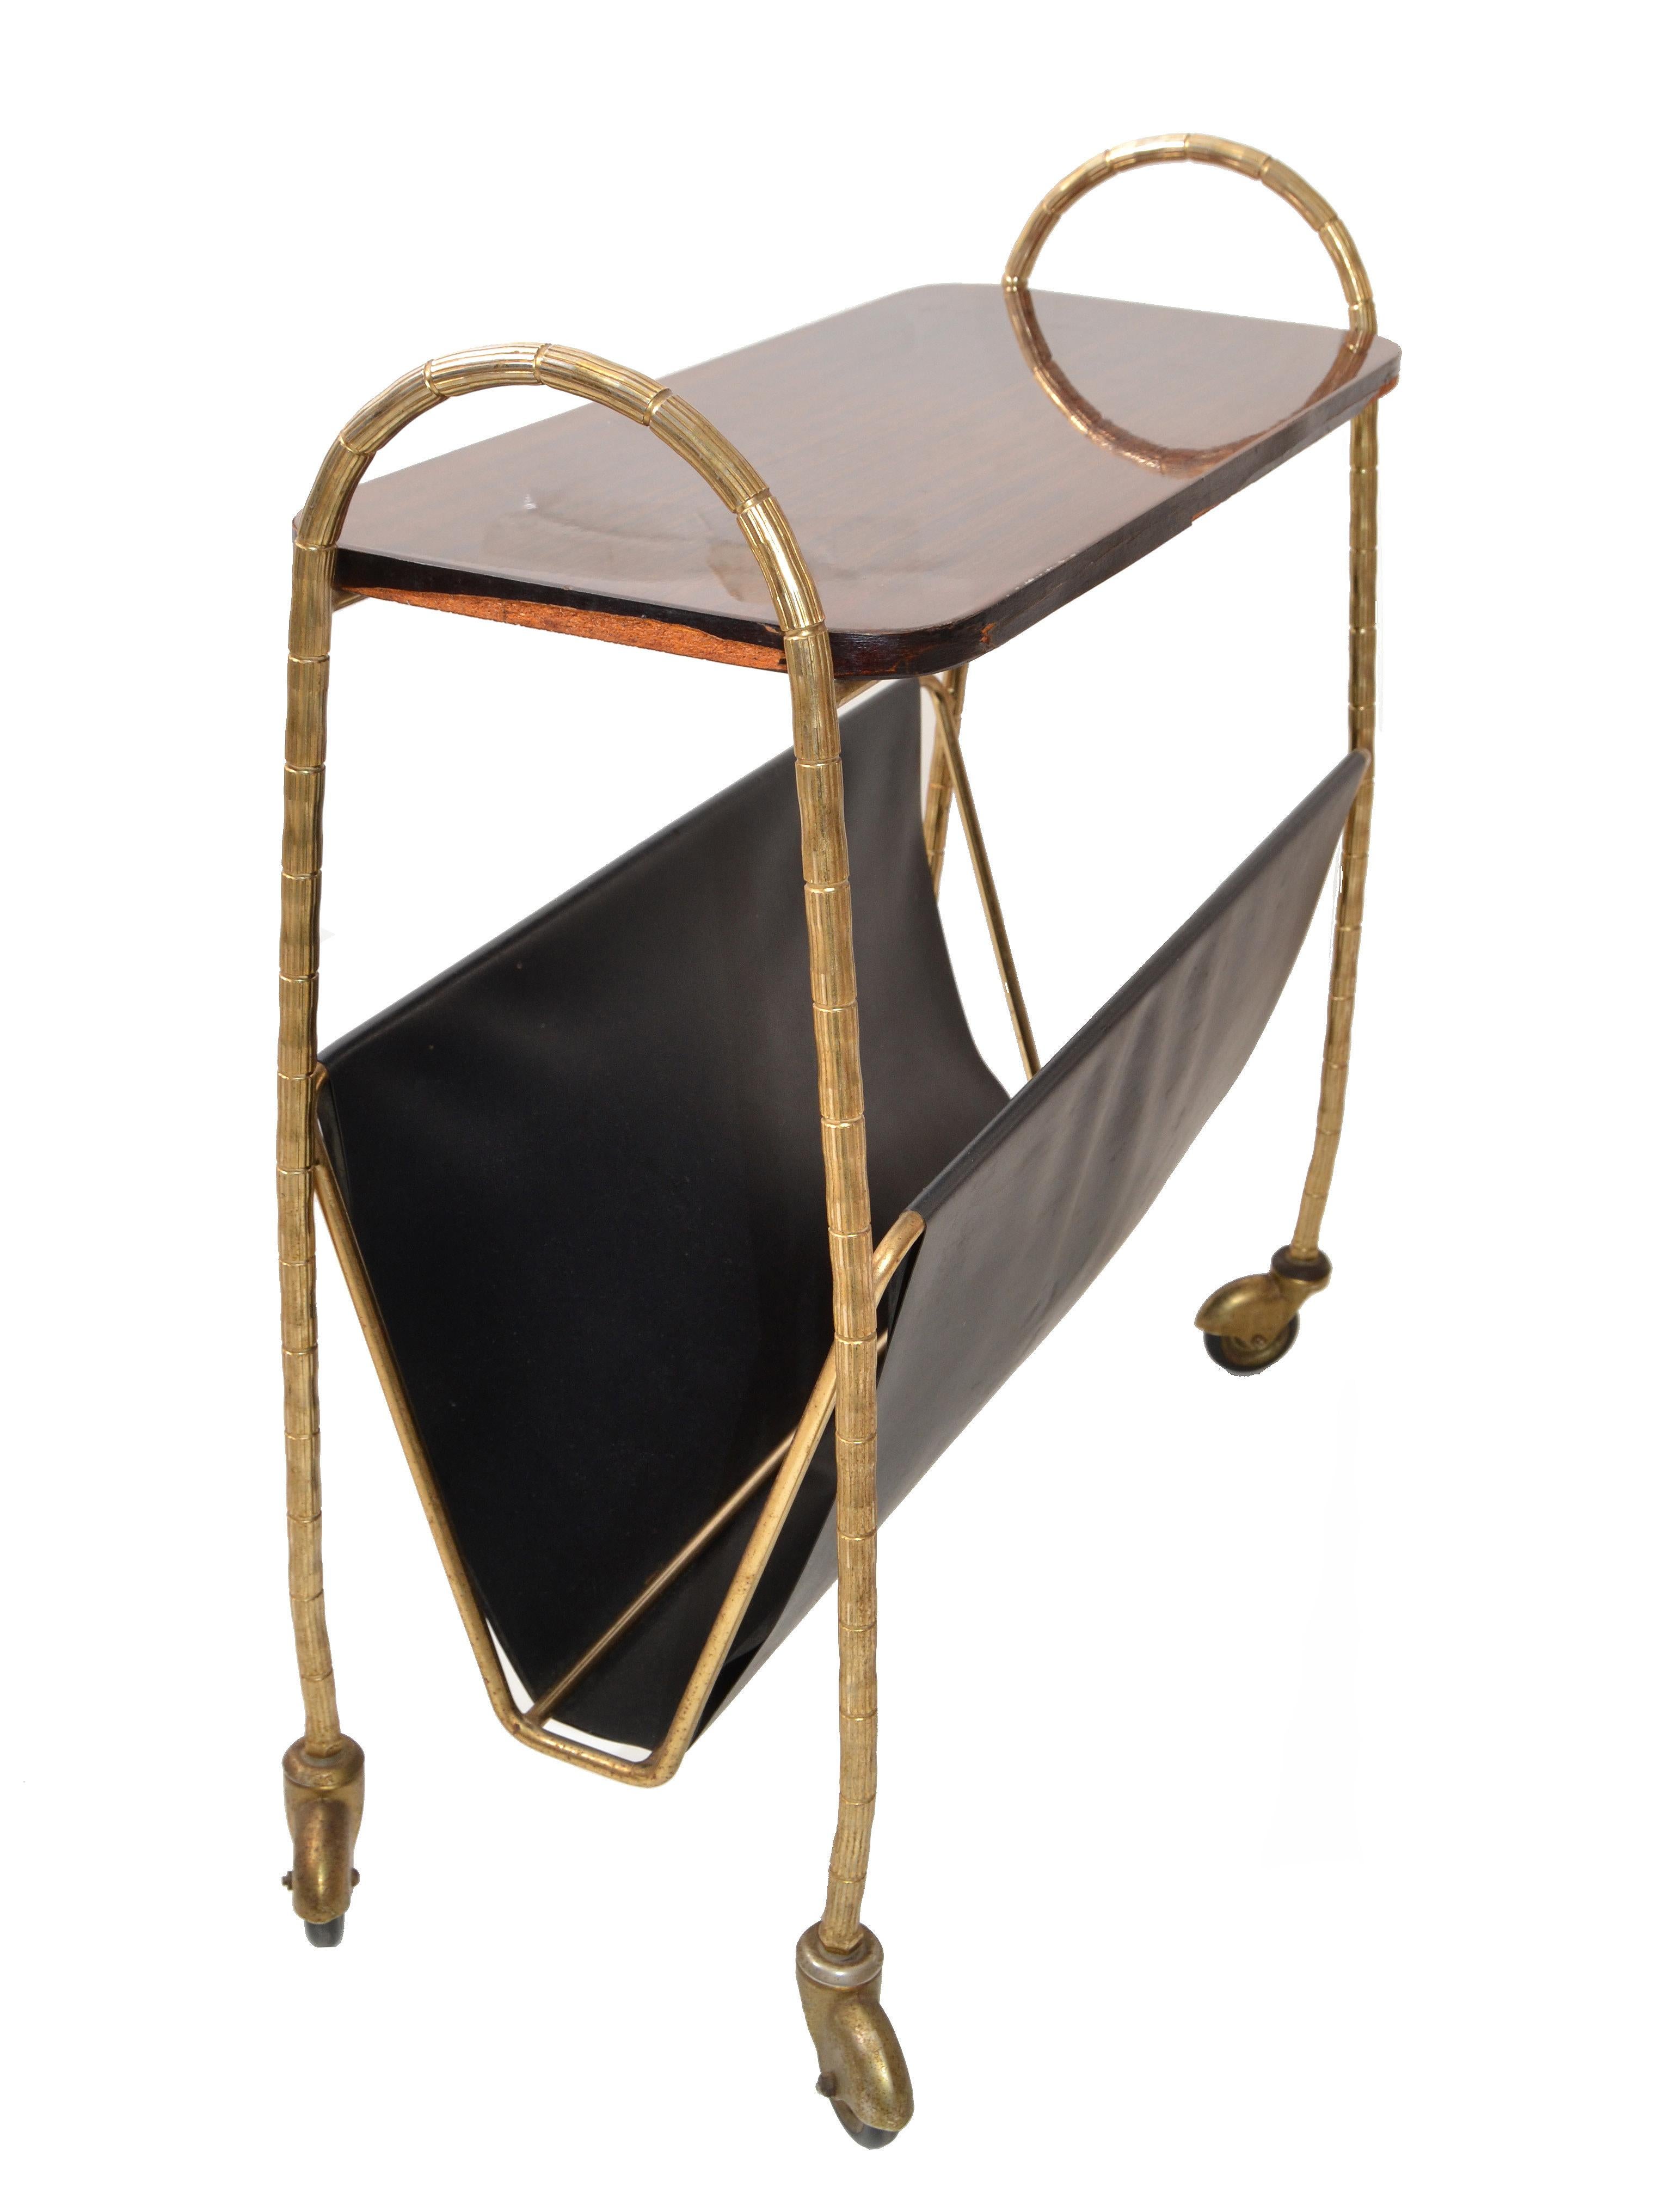 Elegant Maison Baguès French Mid-Century Modern Magazine Rack features Bronze Bamboo style Frame with leather compartment for the magazines.
The Top is laminated Wood with clear lacquer protection.
All original condition and wheels run